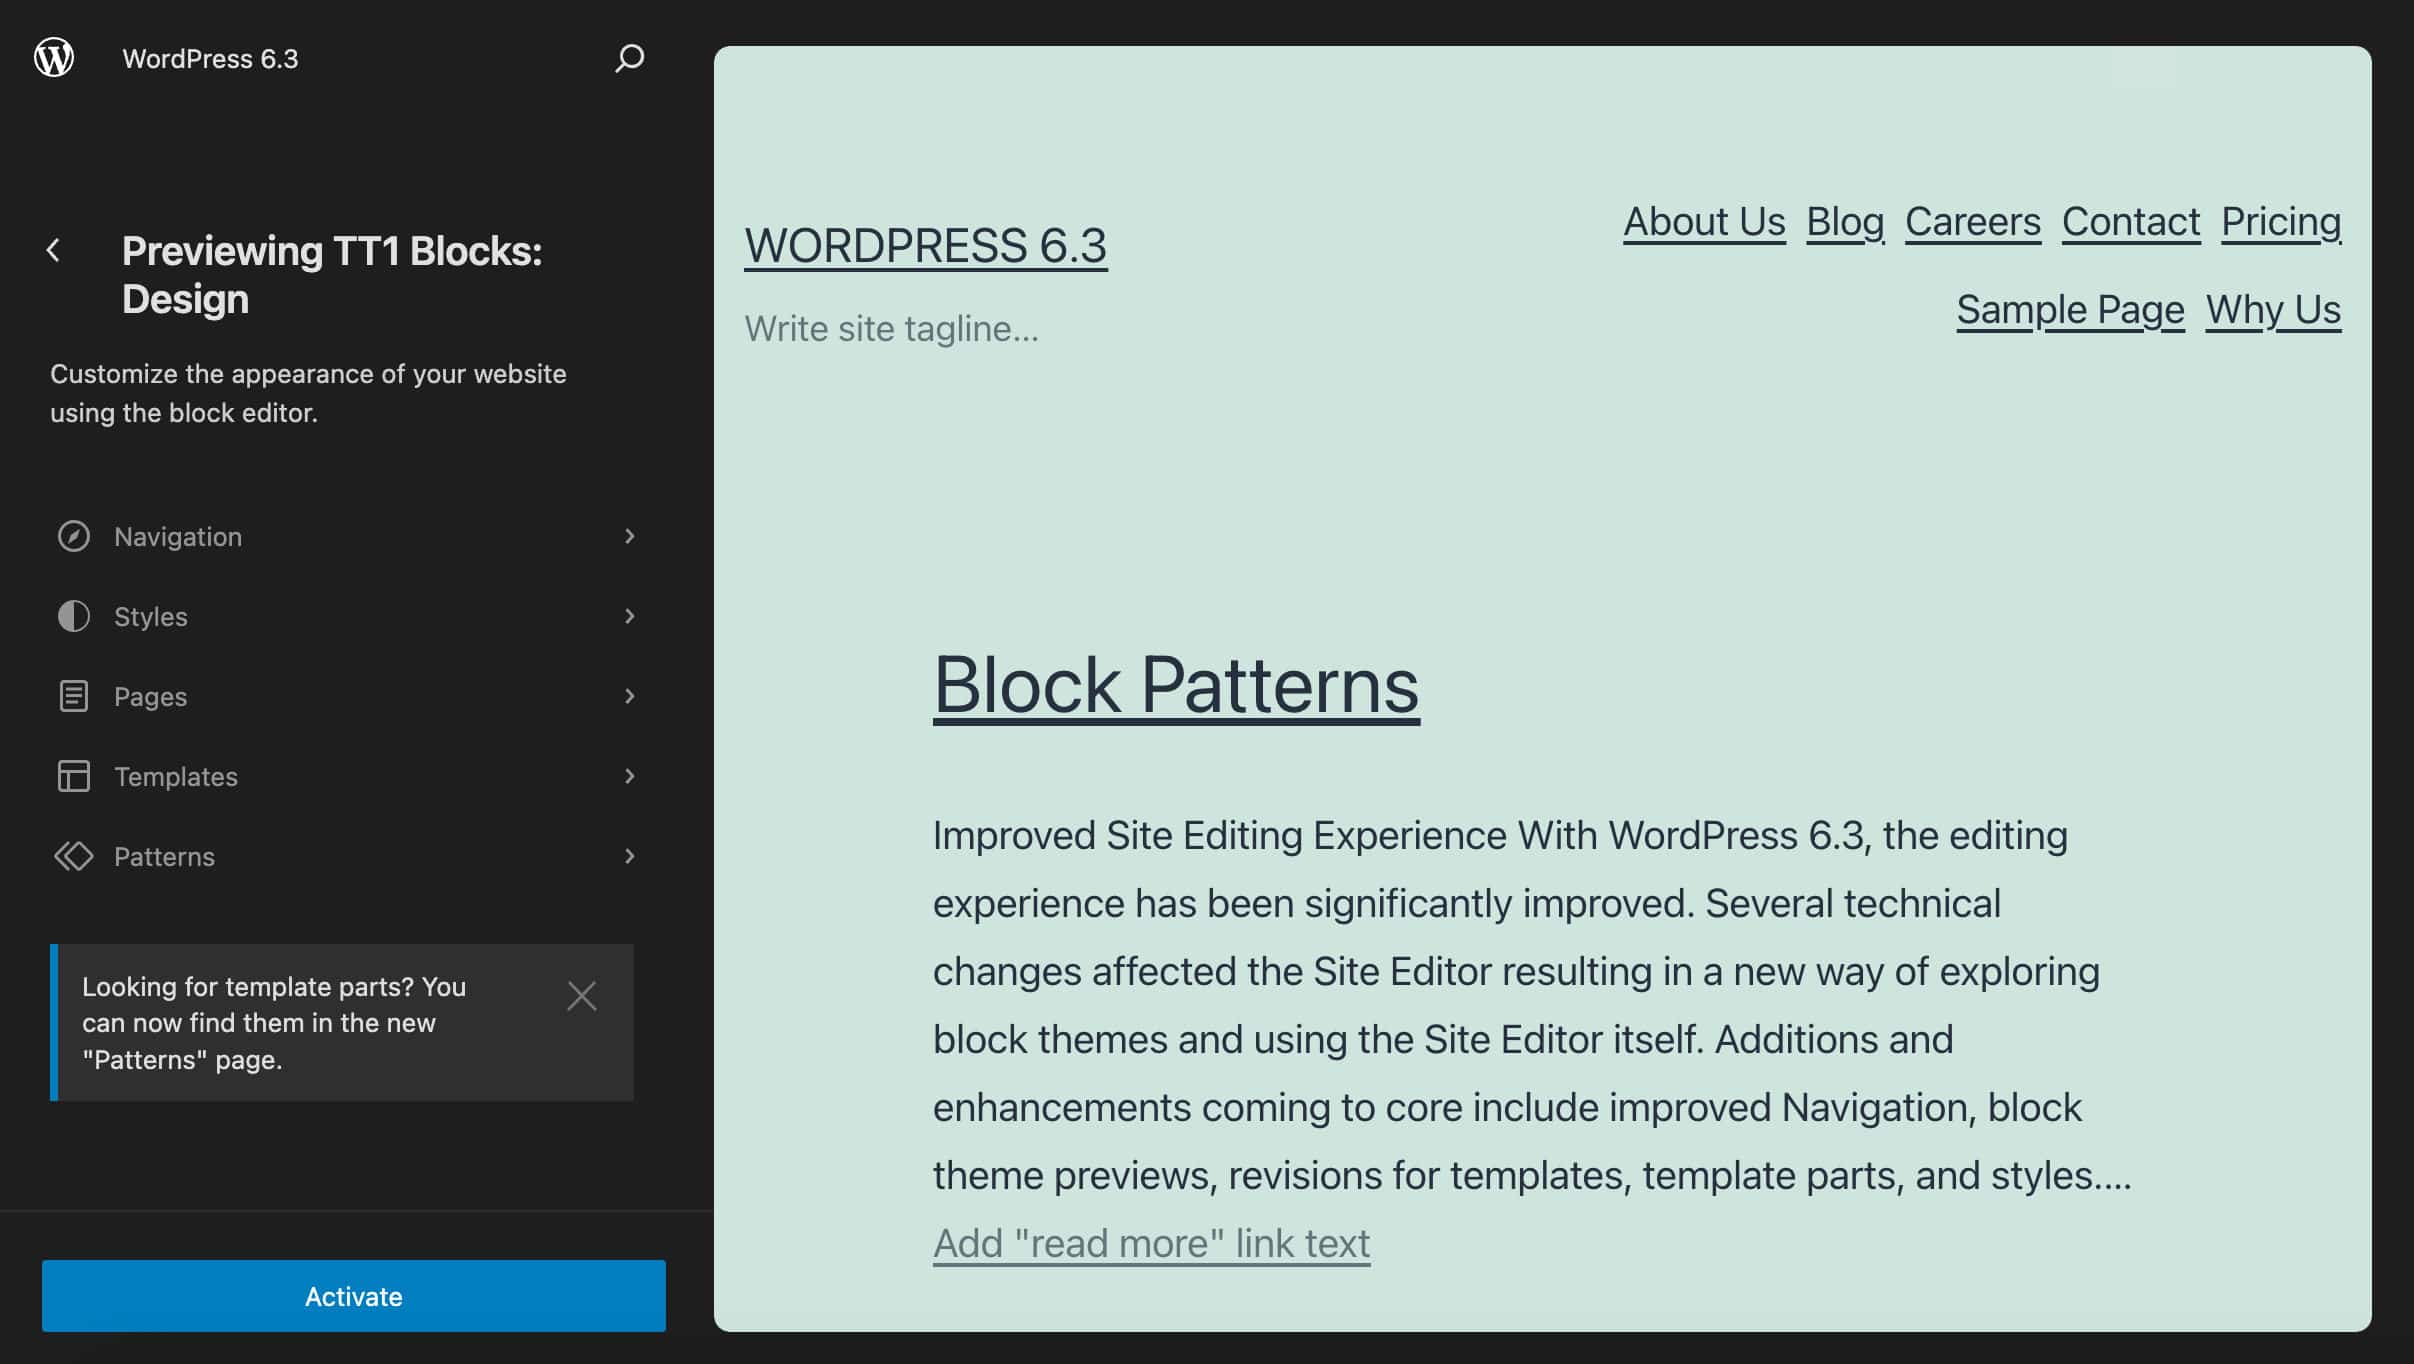 Previewing TT1 Blocks theme in the Site Editor